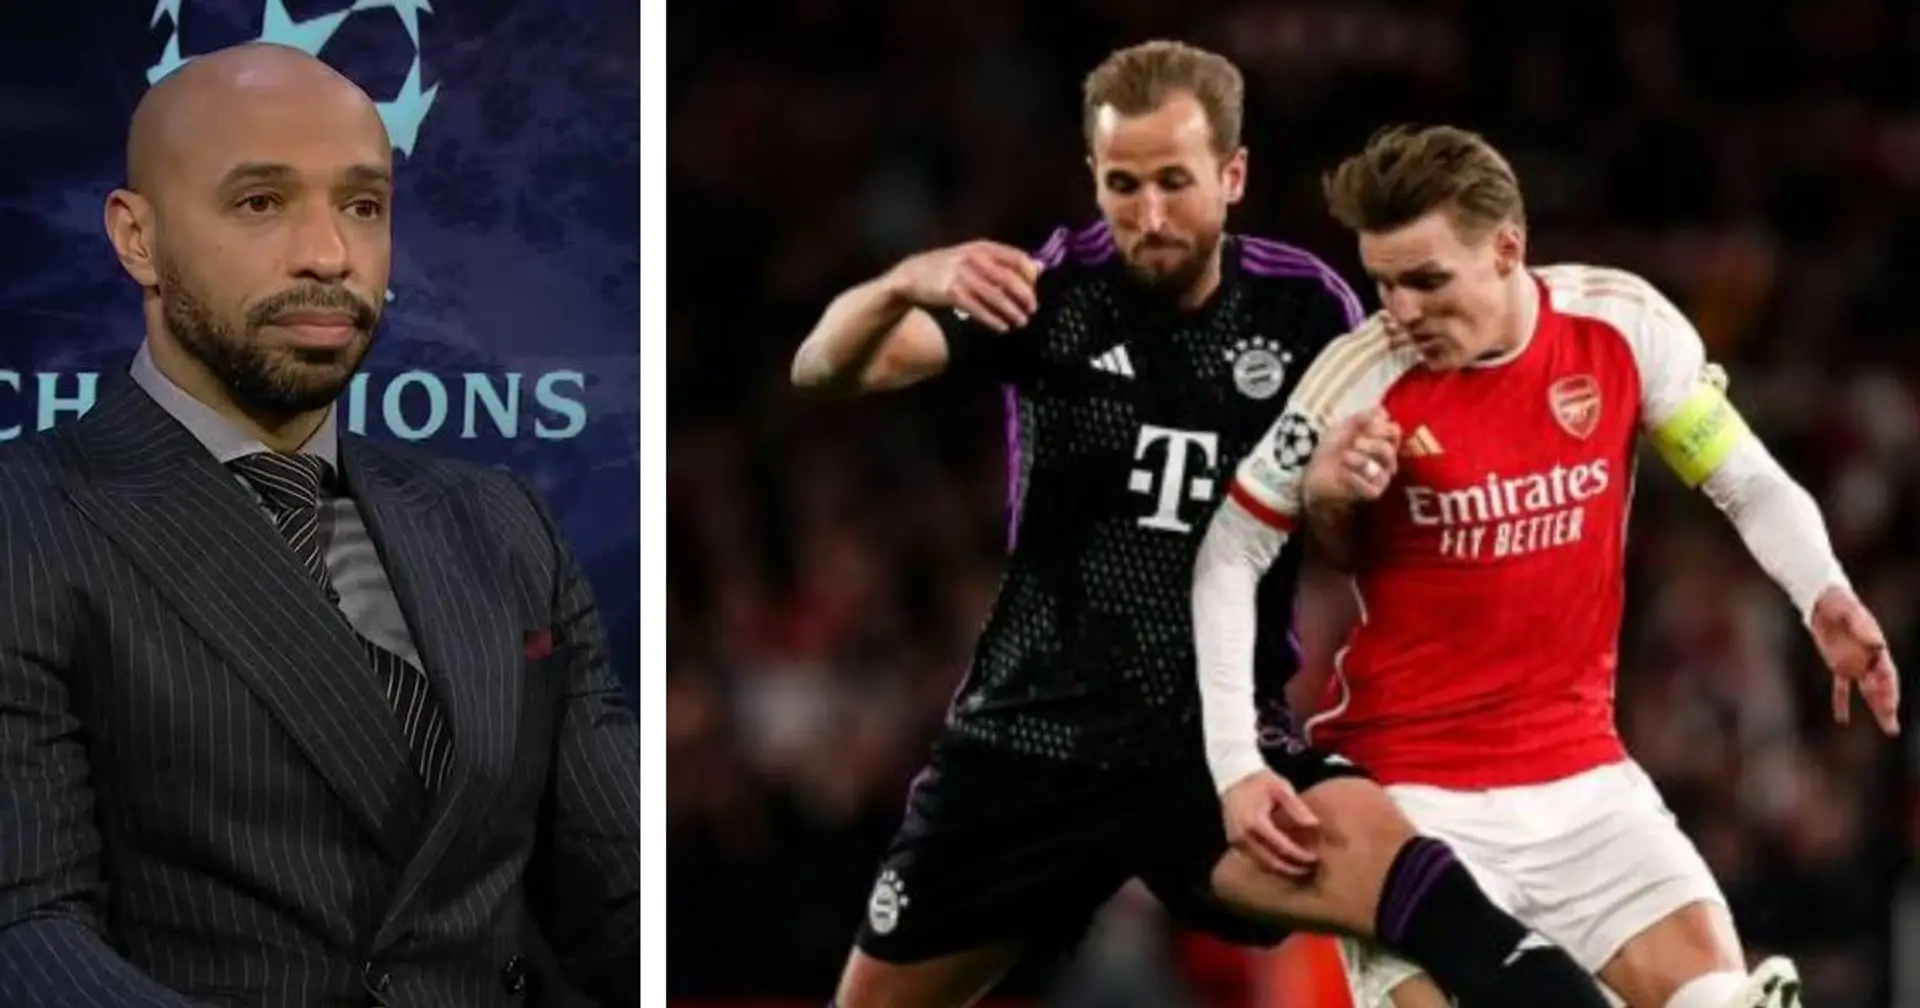 Thierry Henry boldly backs Arsenal to win Champions League, predicts final score as well